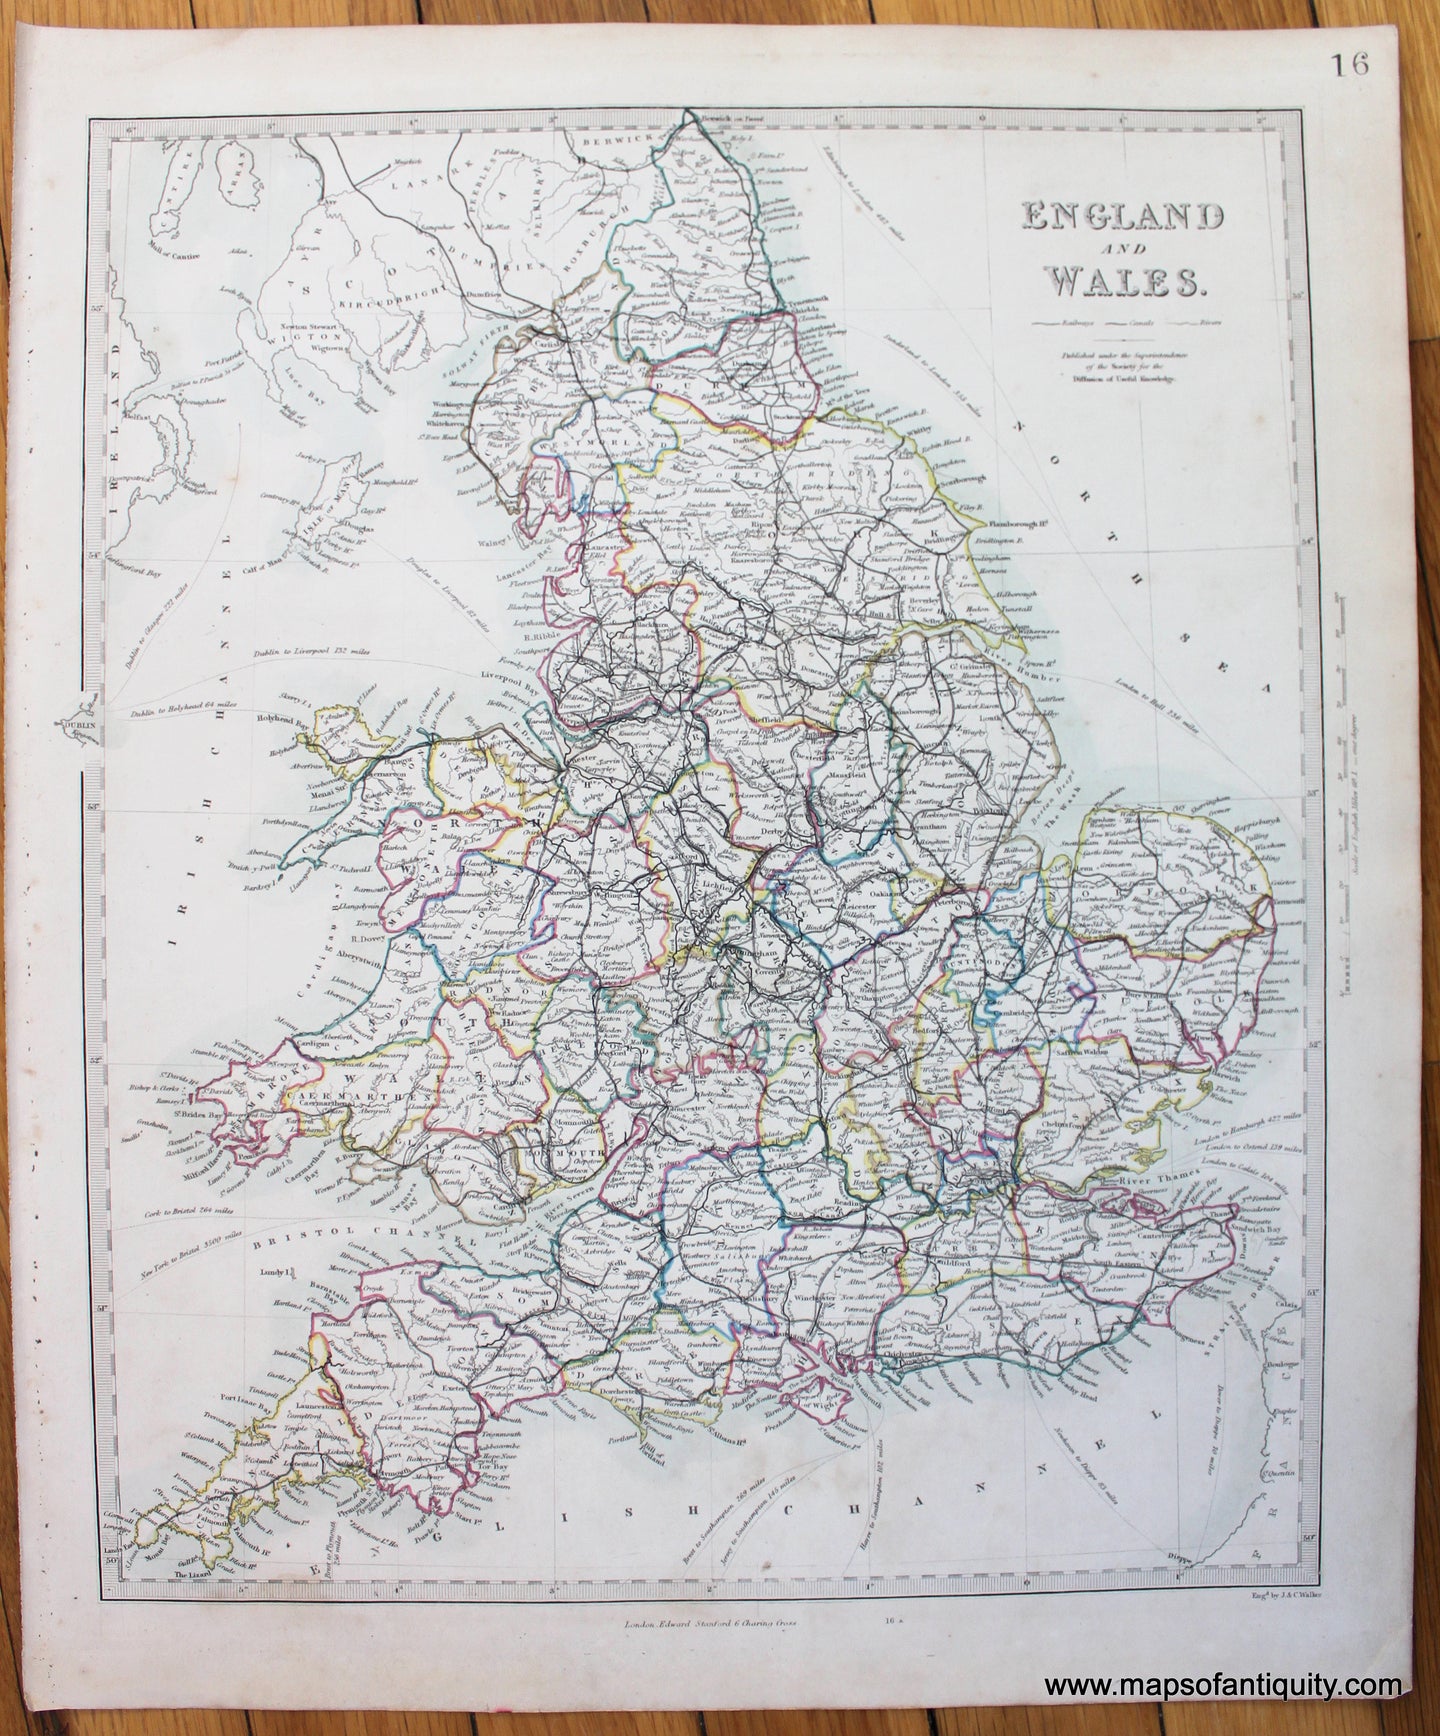 Antique-Map-England-and-Wales-SDUK-Society-for-the-Diffusion-of-Useful-Knowledge-1850-1850s-1800s-Early-Mid-19th-Century-Maps-of-Antiquity